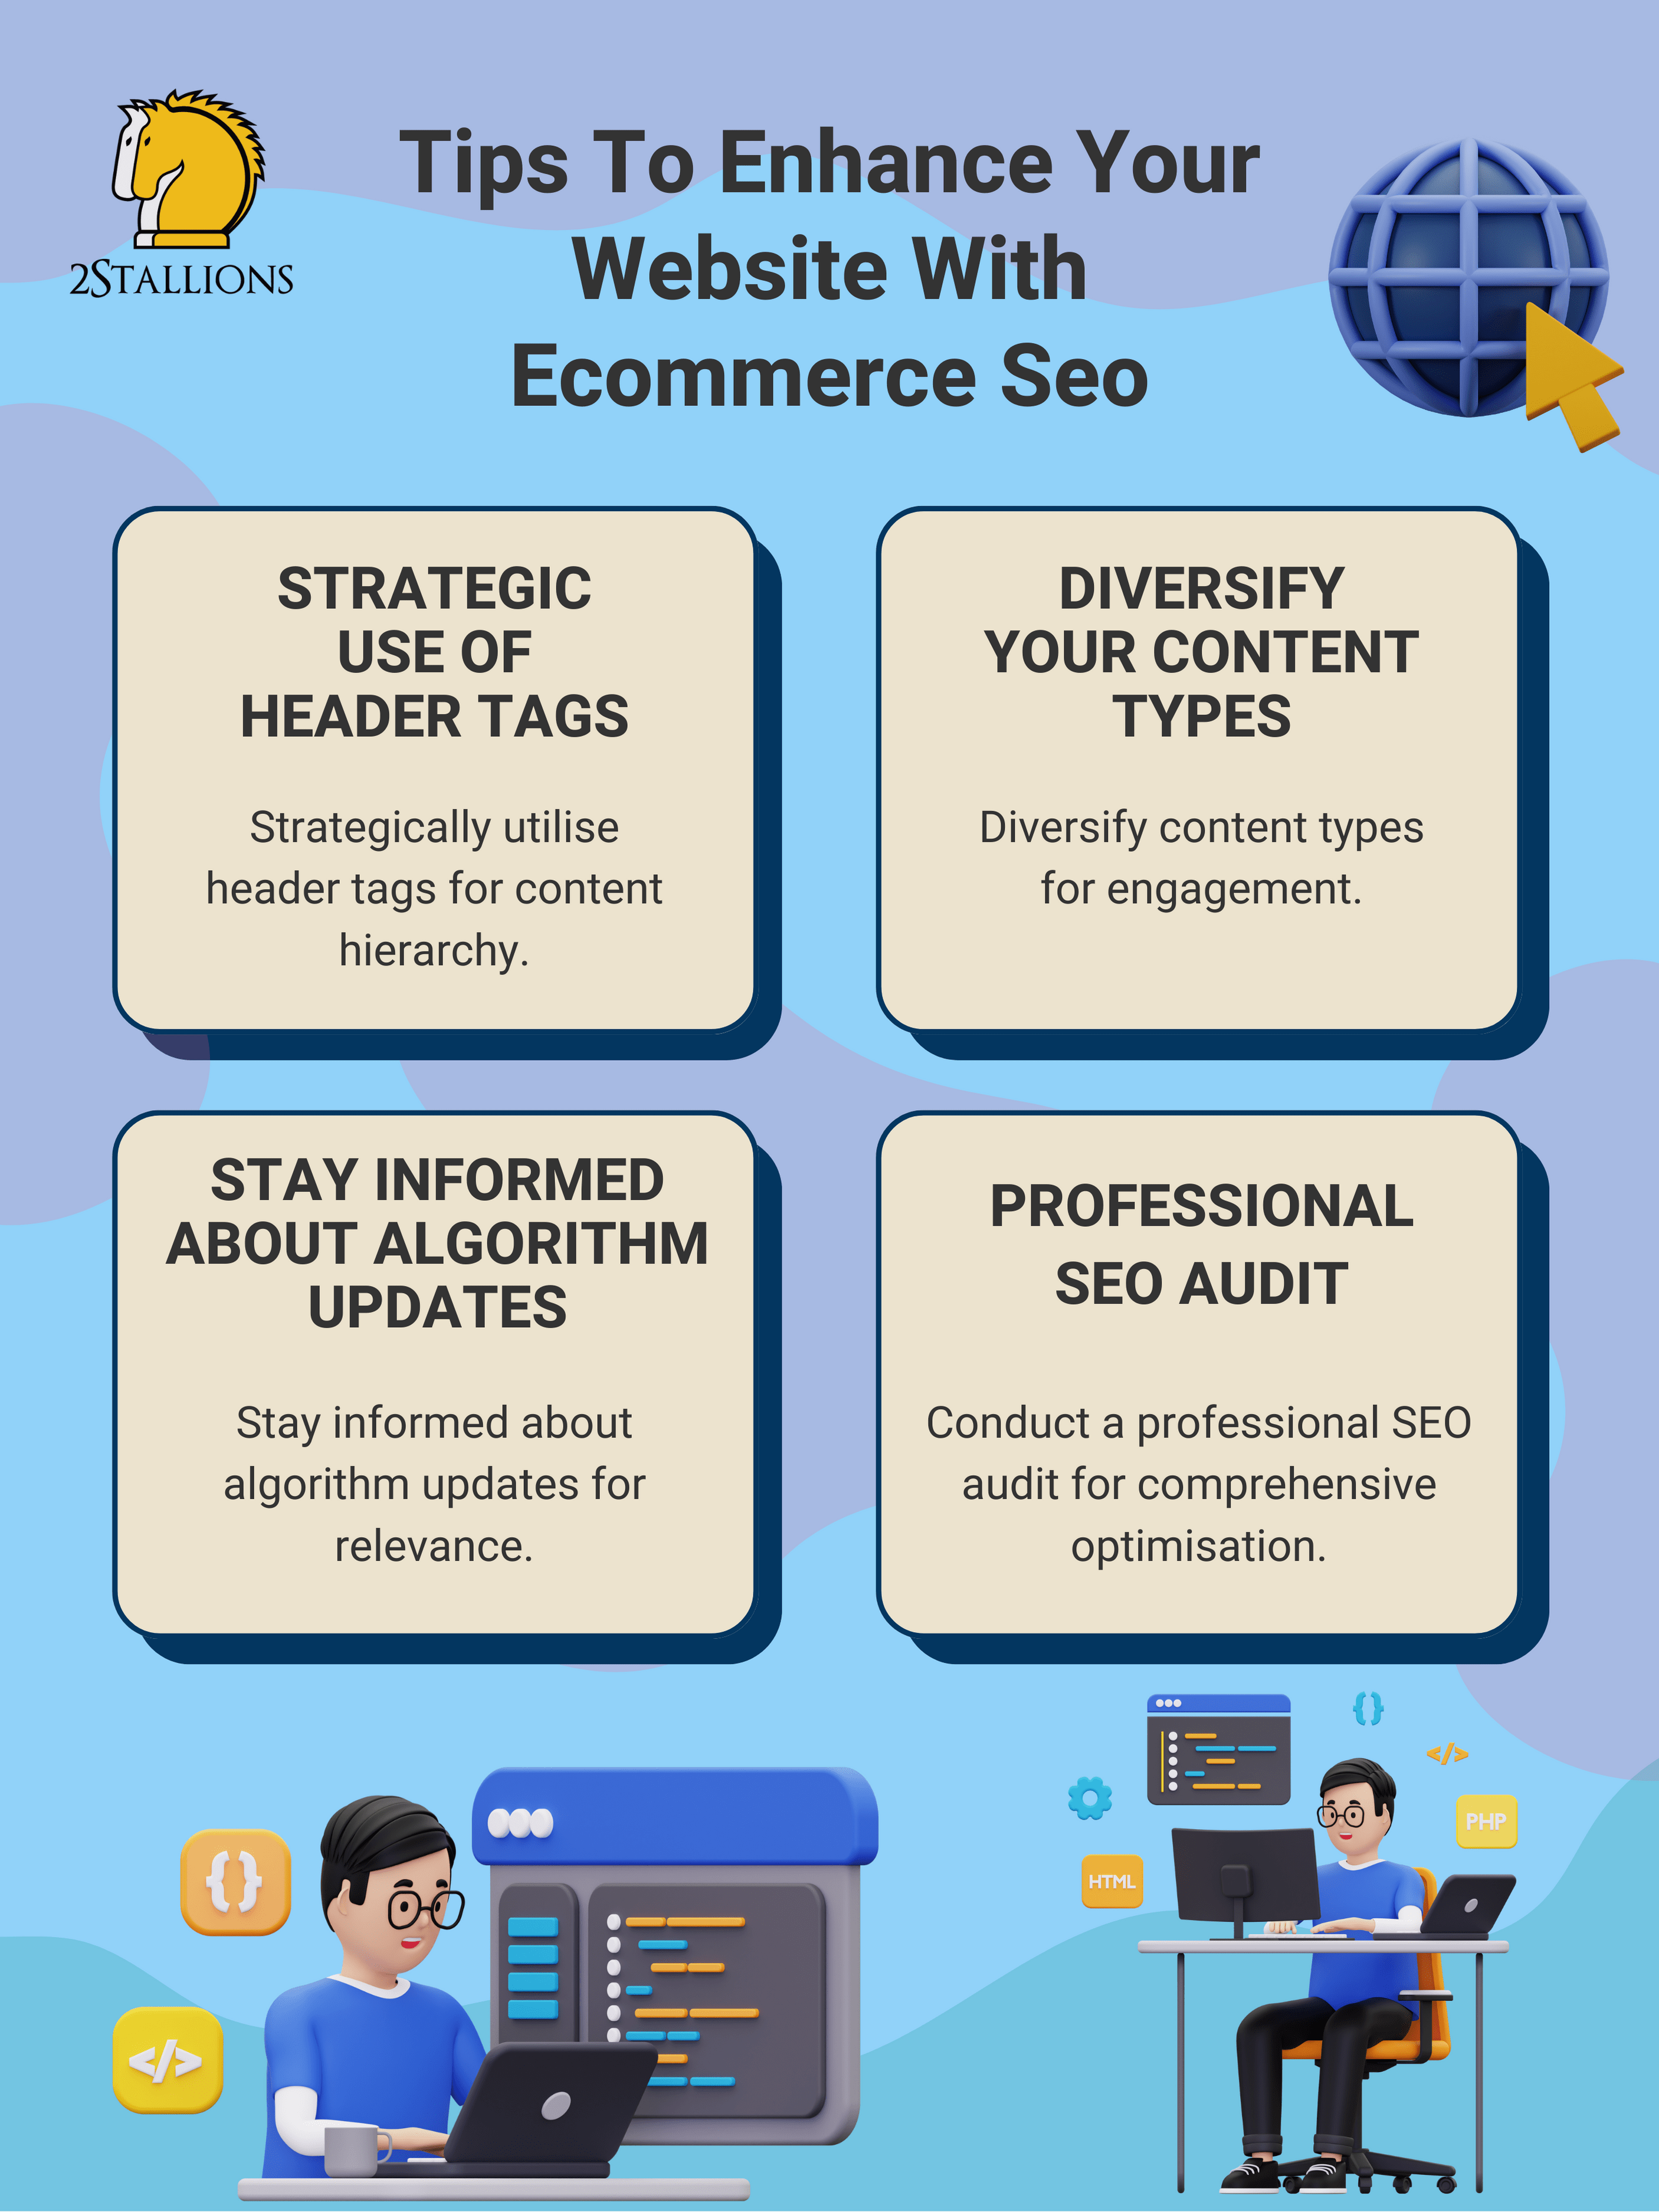 Tips To Improve SEO For ECommerce | 2Stallions